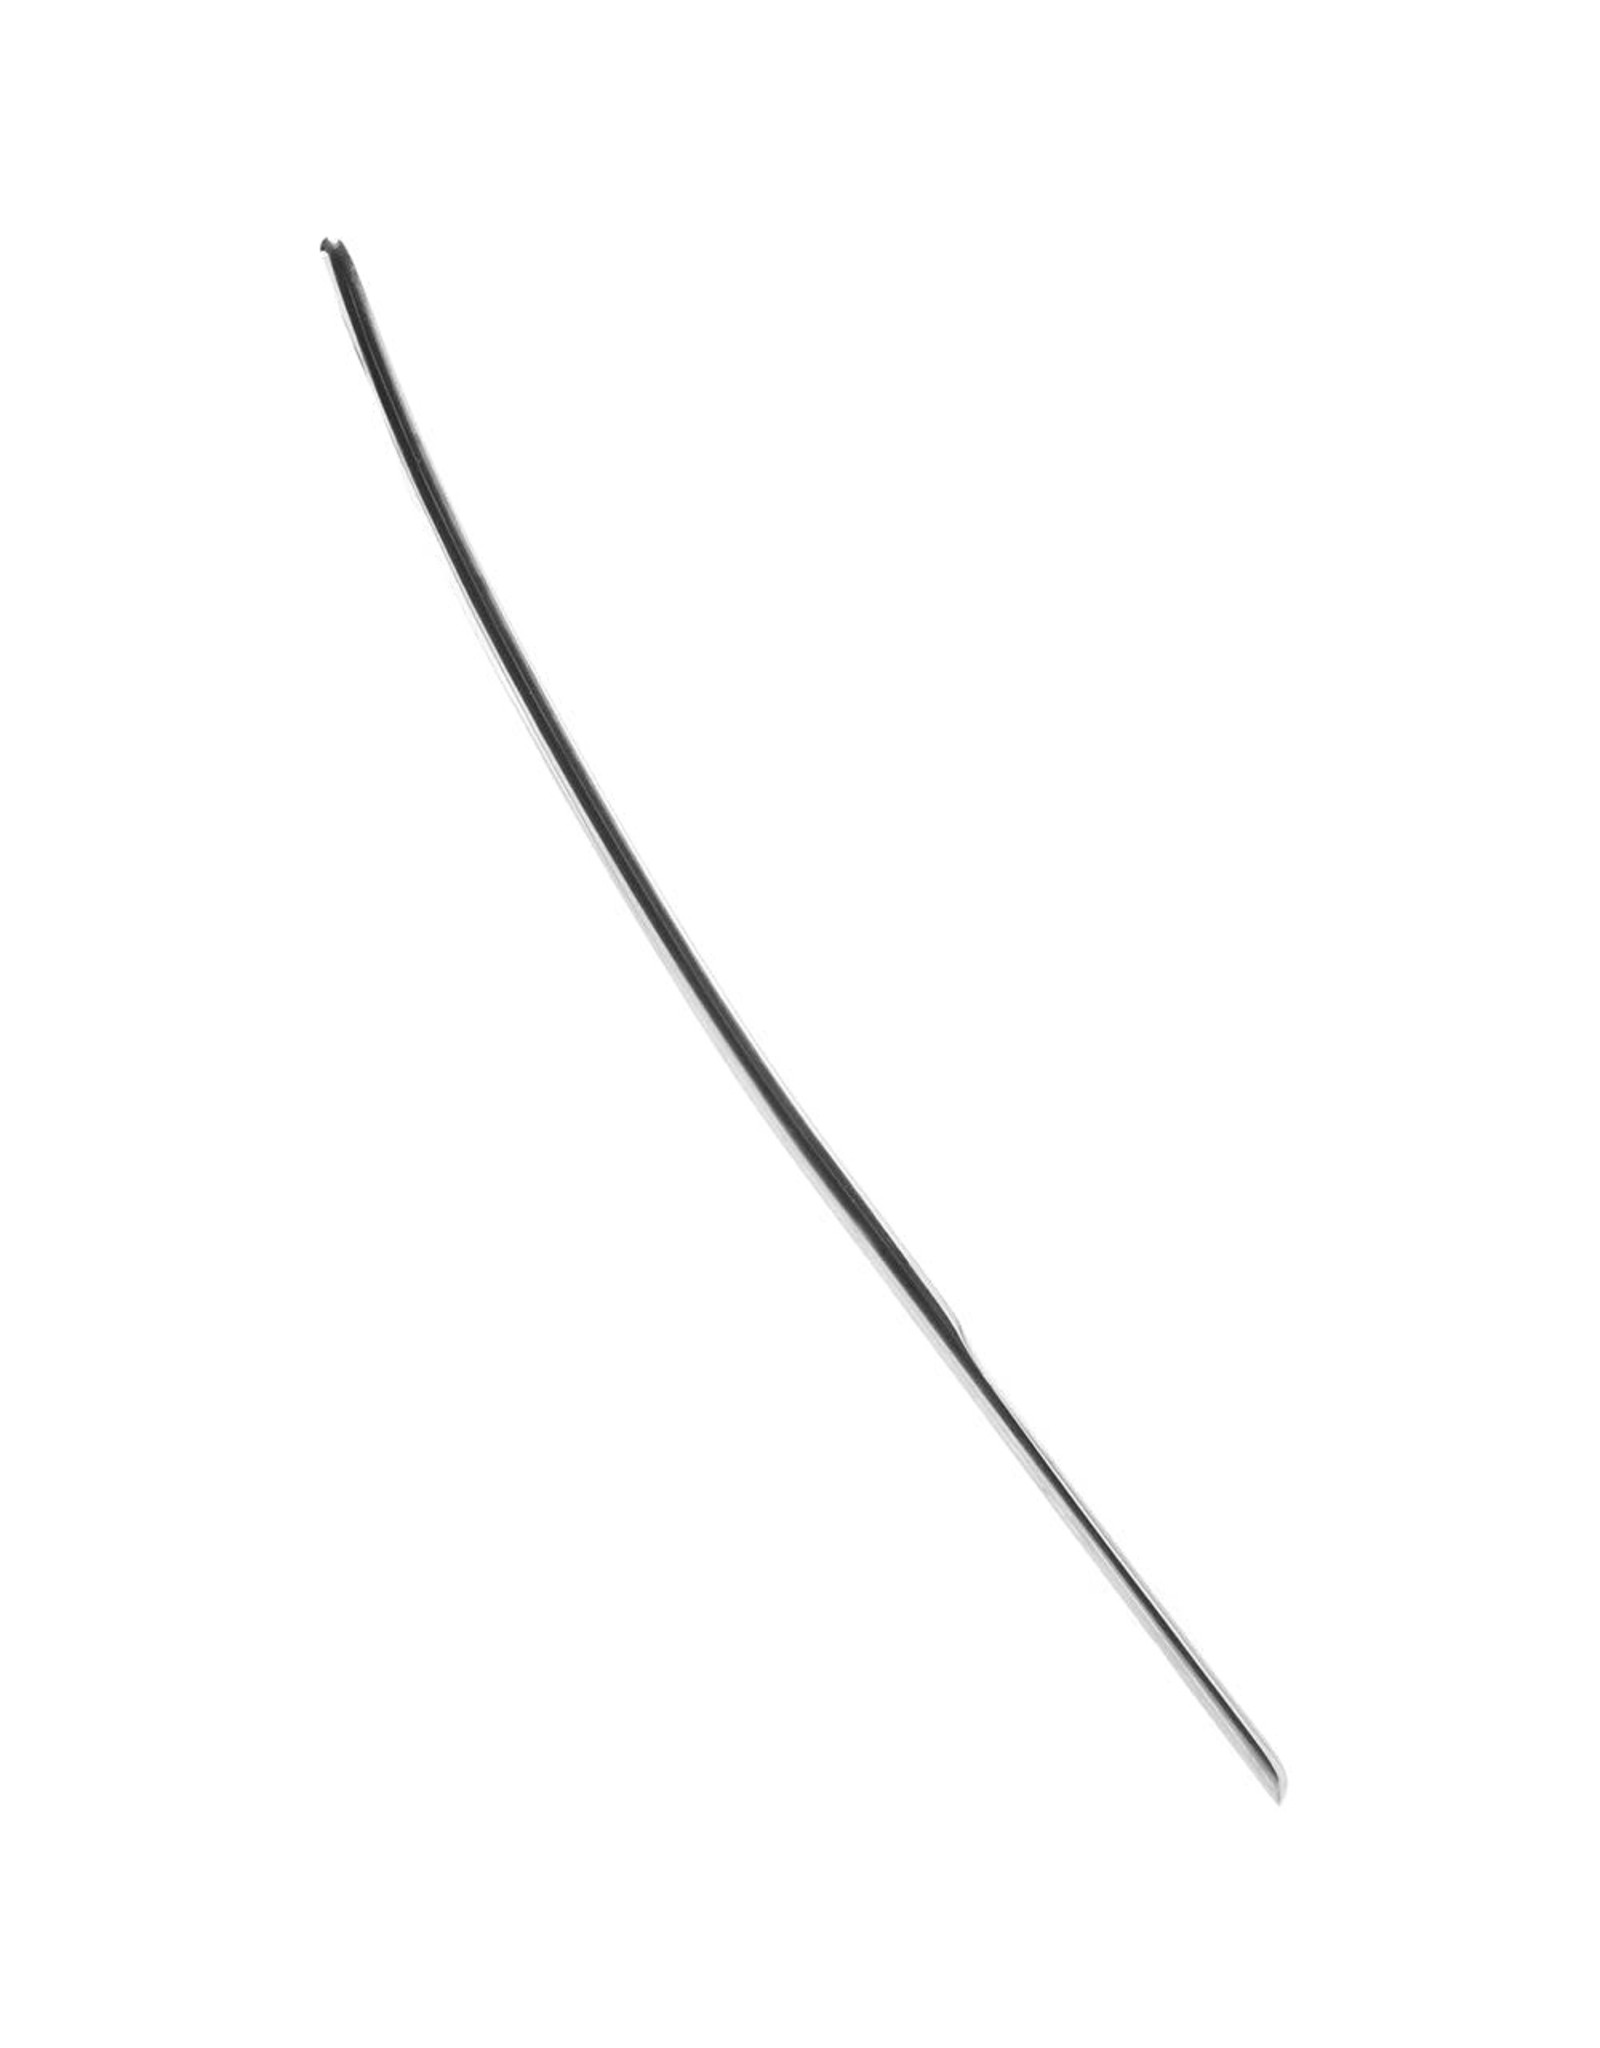 Rouge - 4mm Stainless Steel Urethral Sound